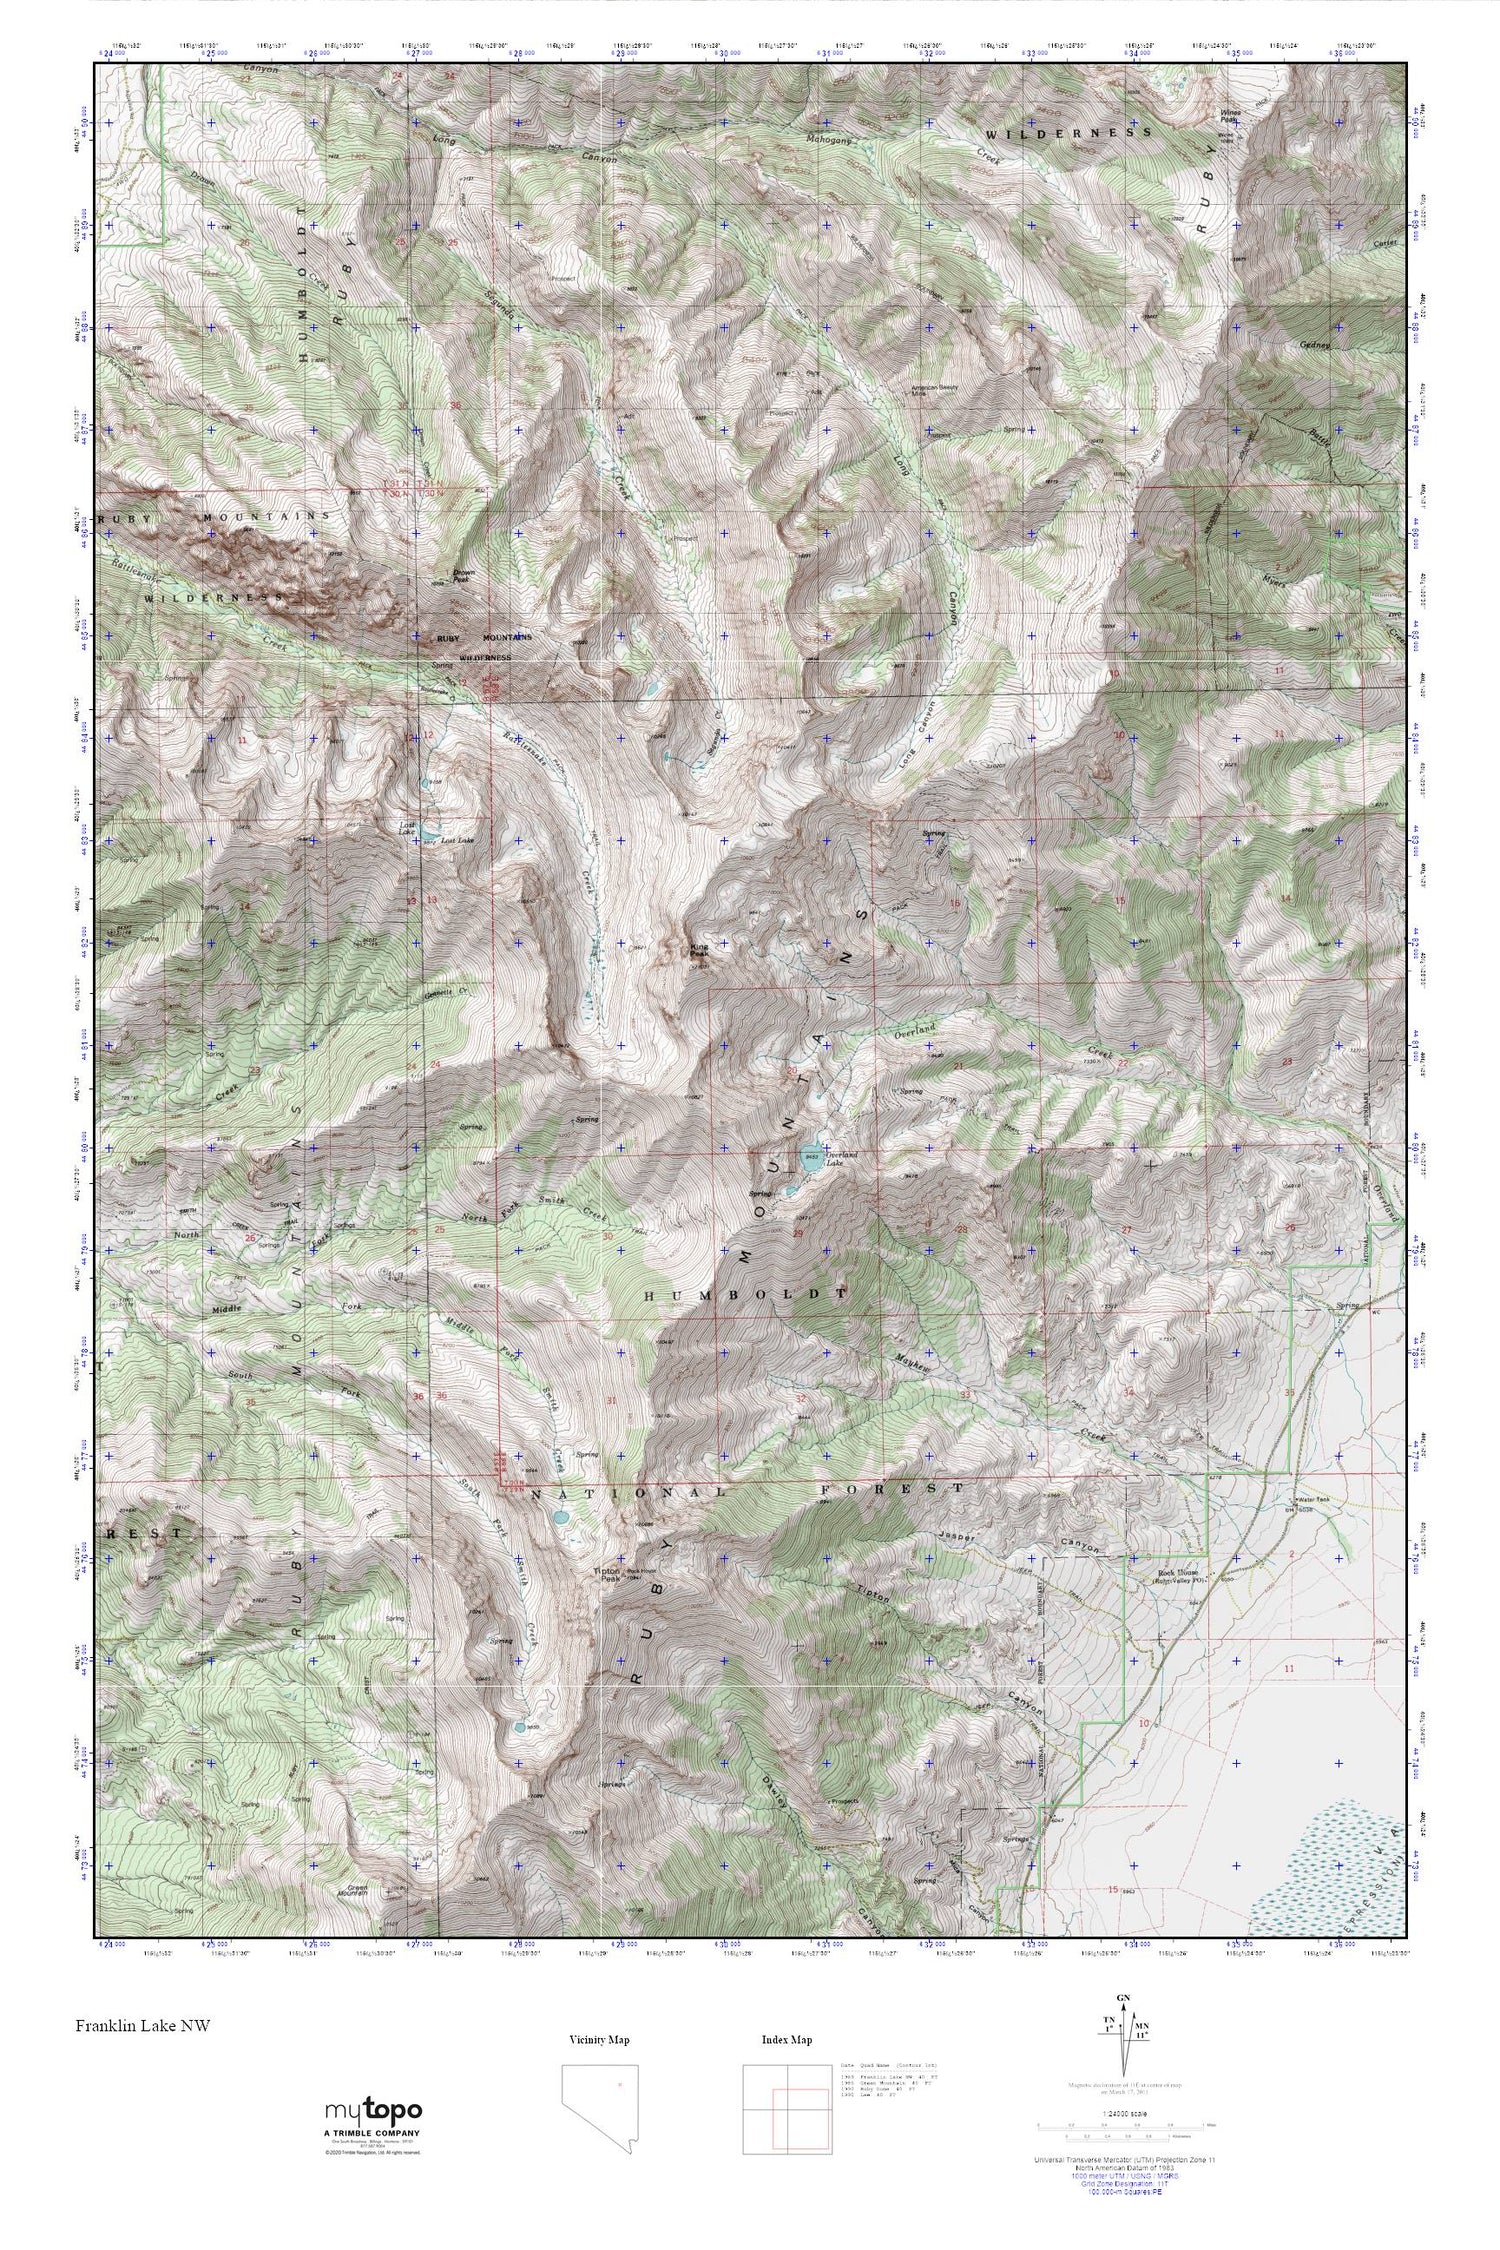 Ruby Crest Trail MyTopo Explorer Series Map Image